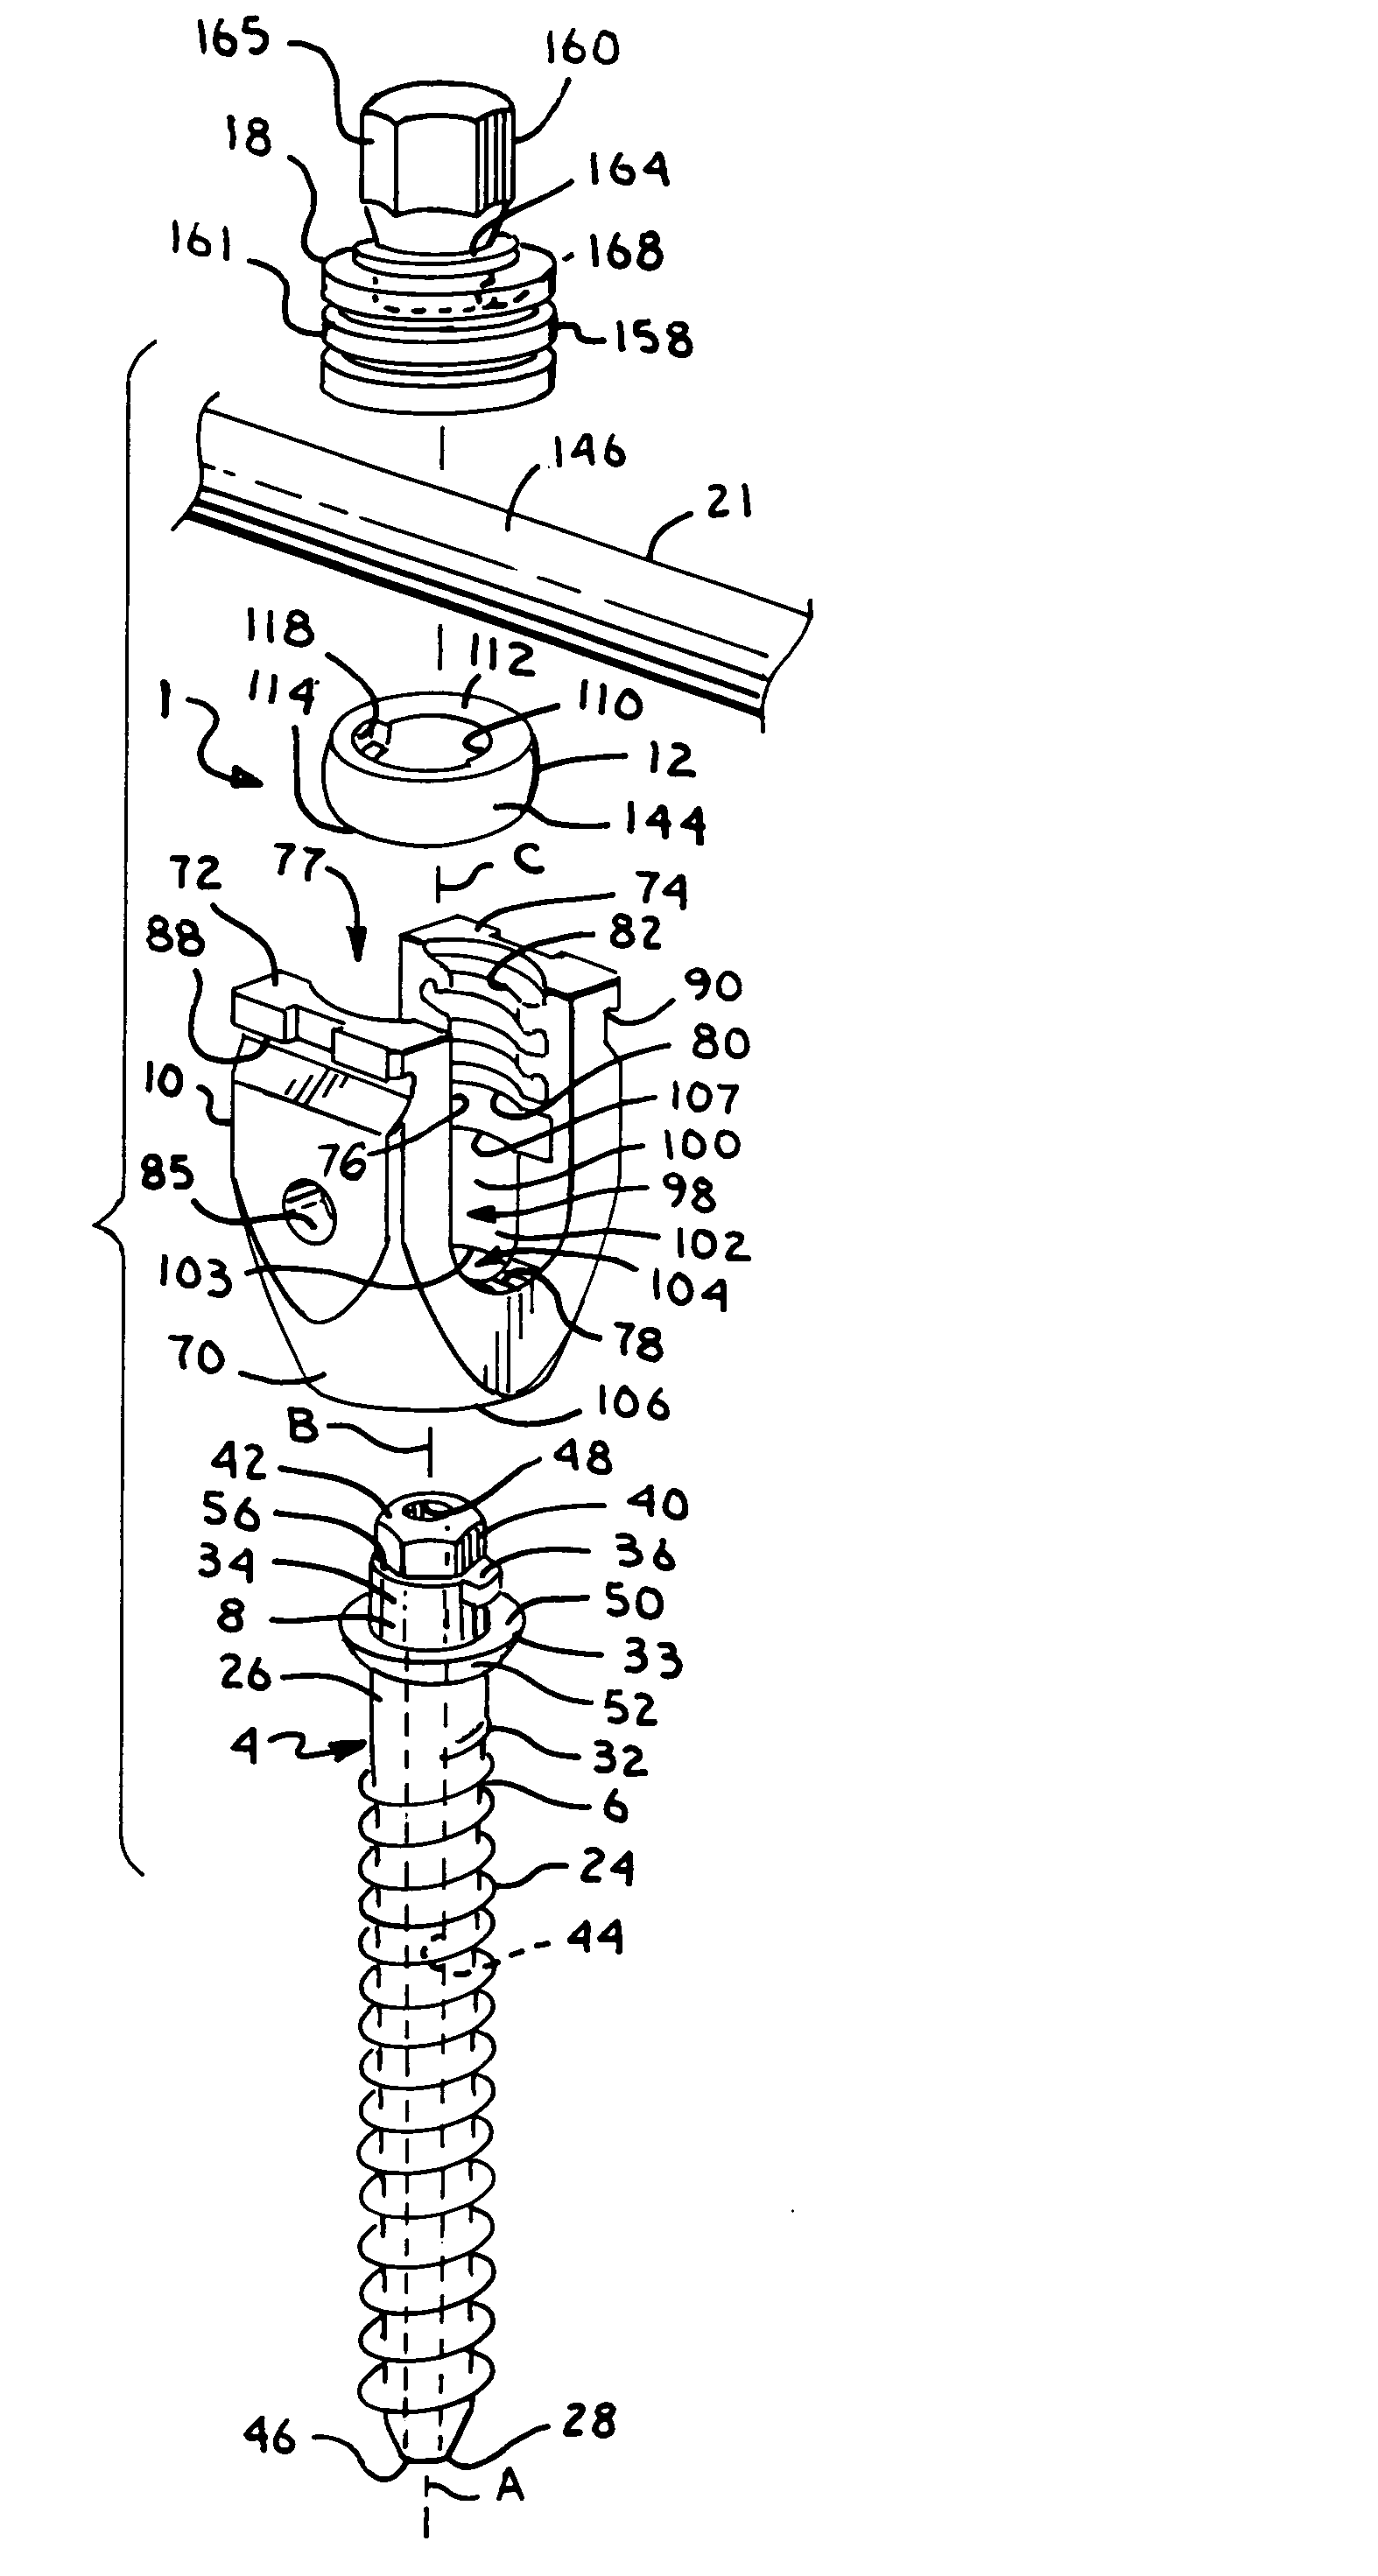 Polyaxial bone screw with cam capture